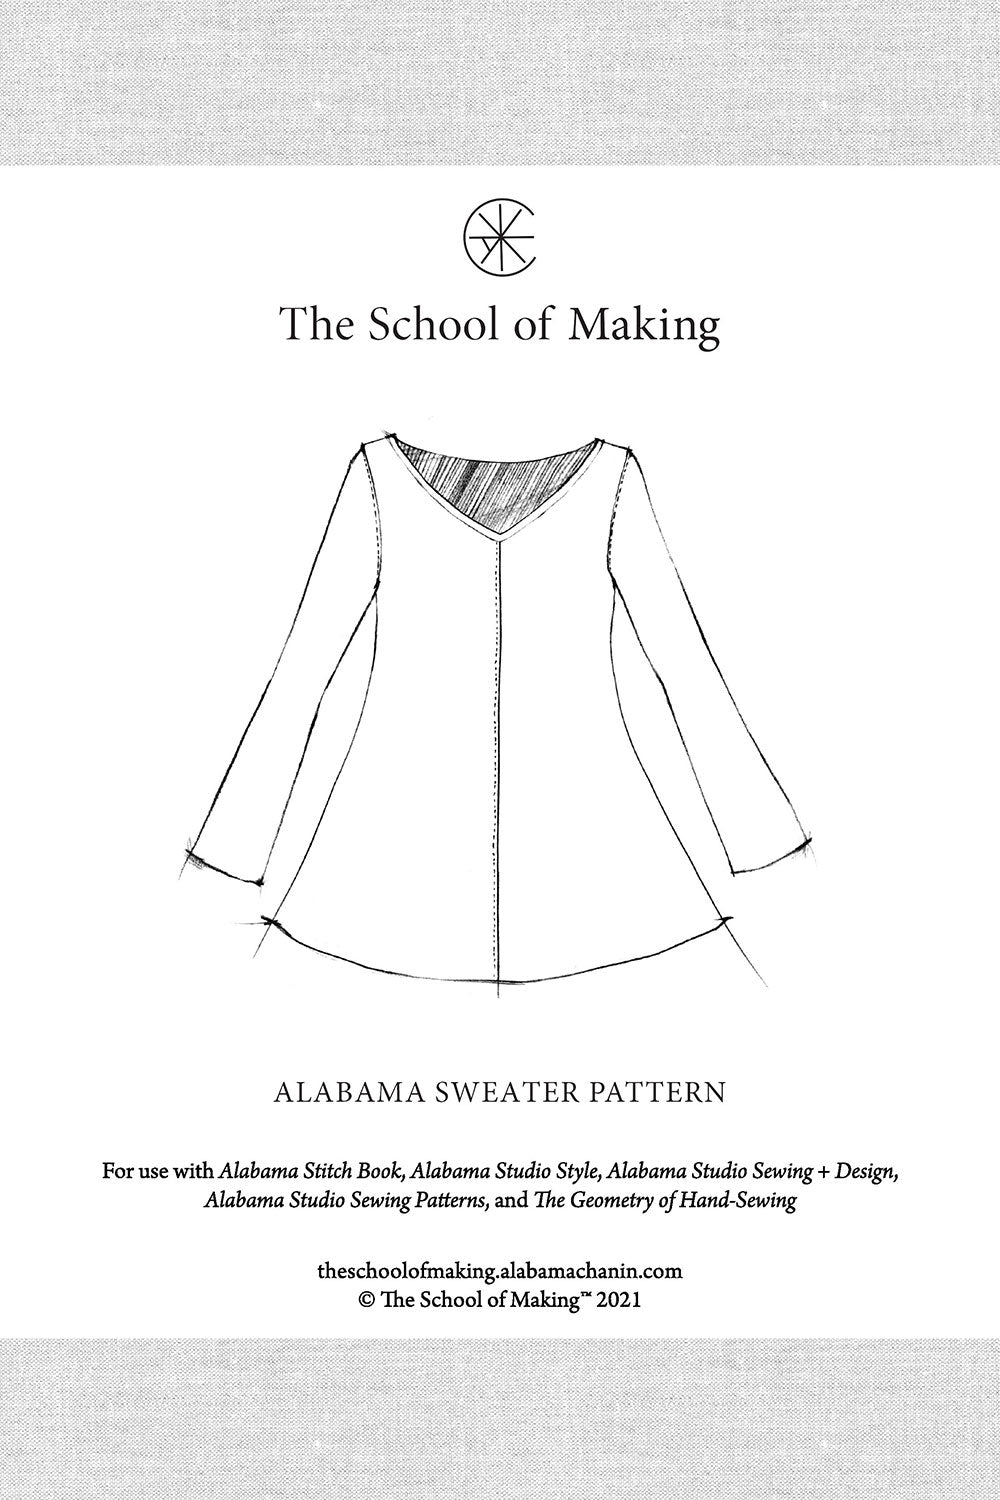 The School of Making Alabama Sweater Pattern Sewing Pattern for Hand-Sewing Clothing.